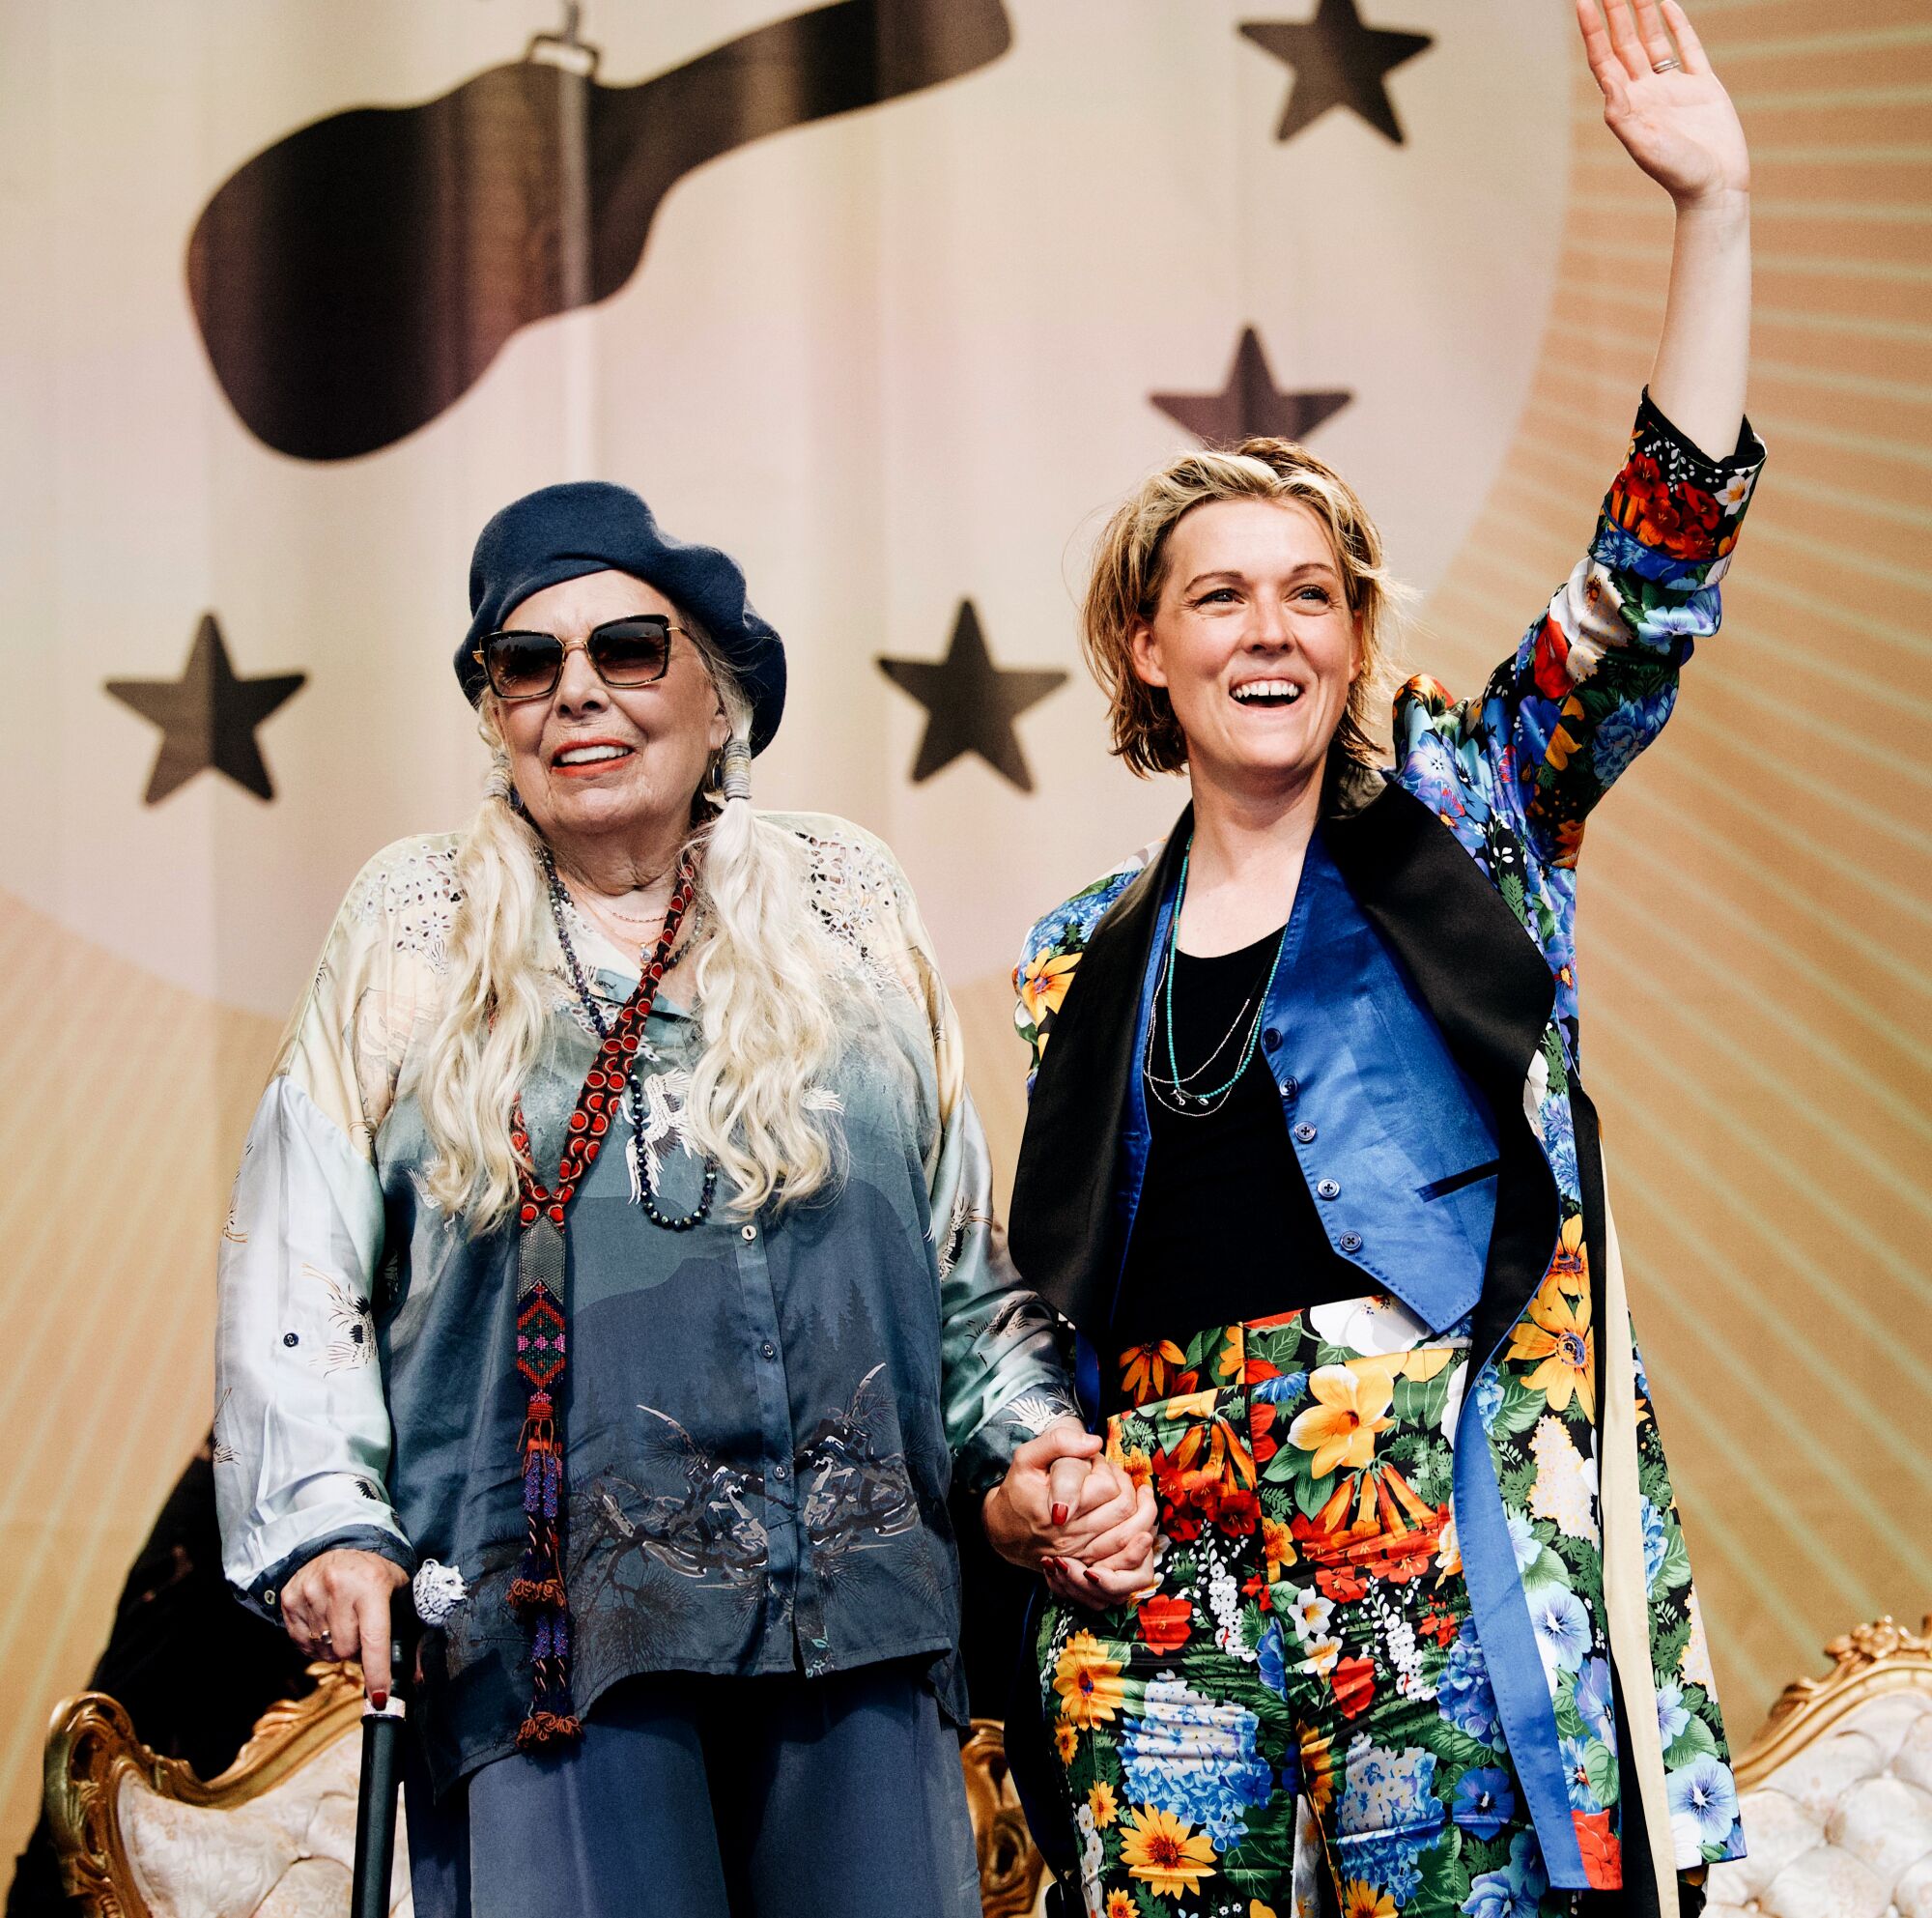 Two female singer-songwriters on stage together, waving at the crowd